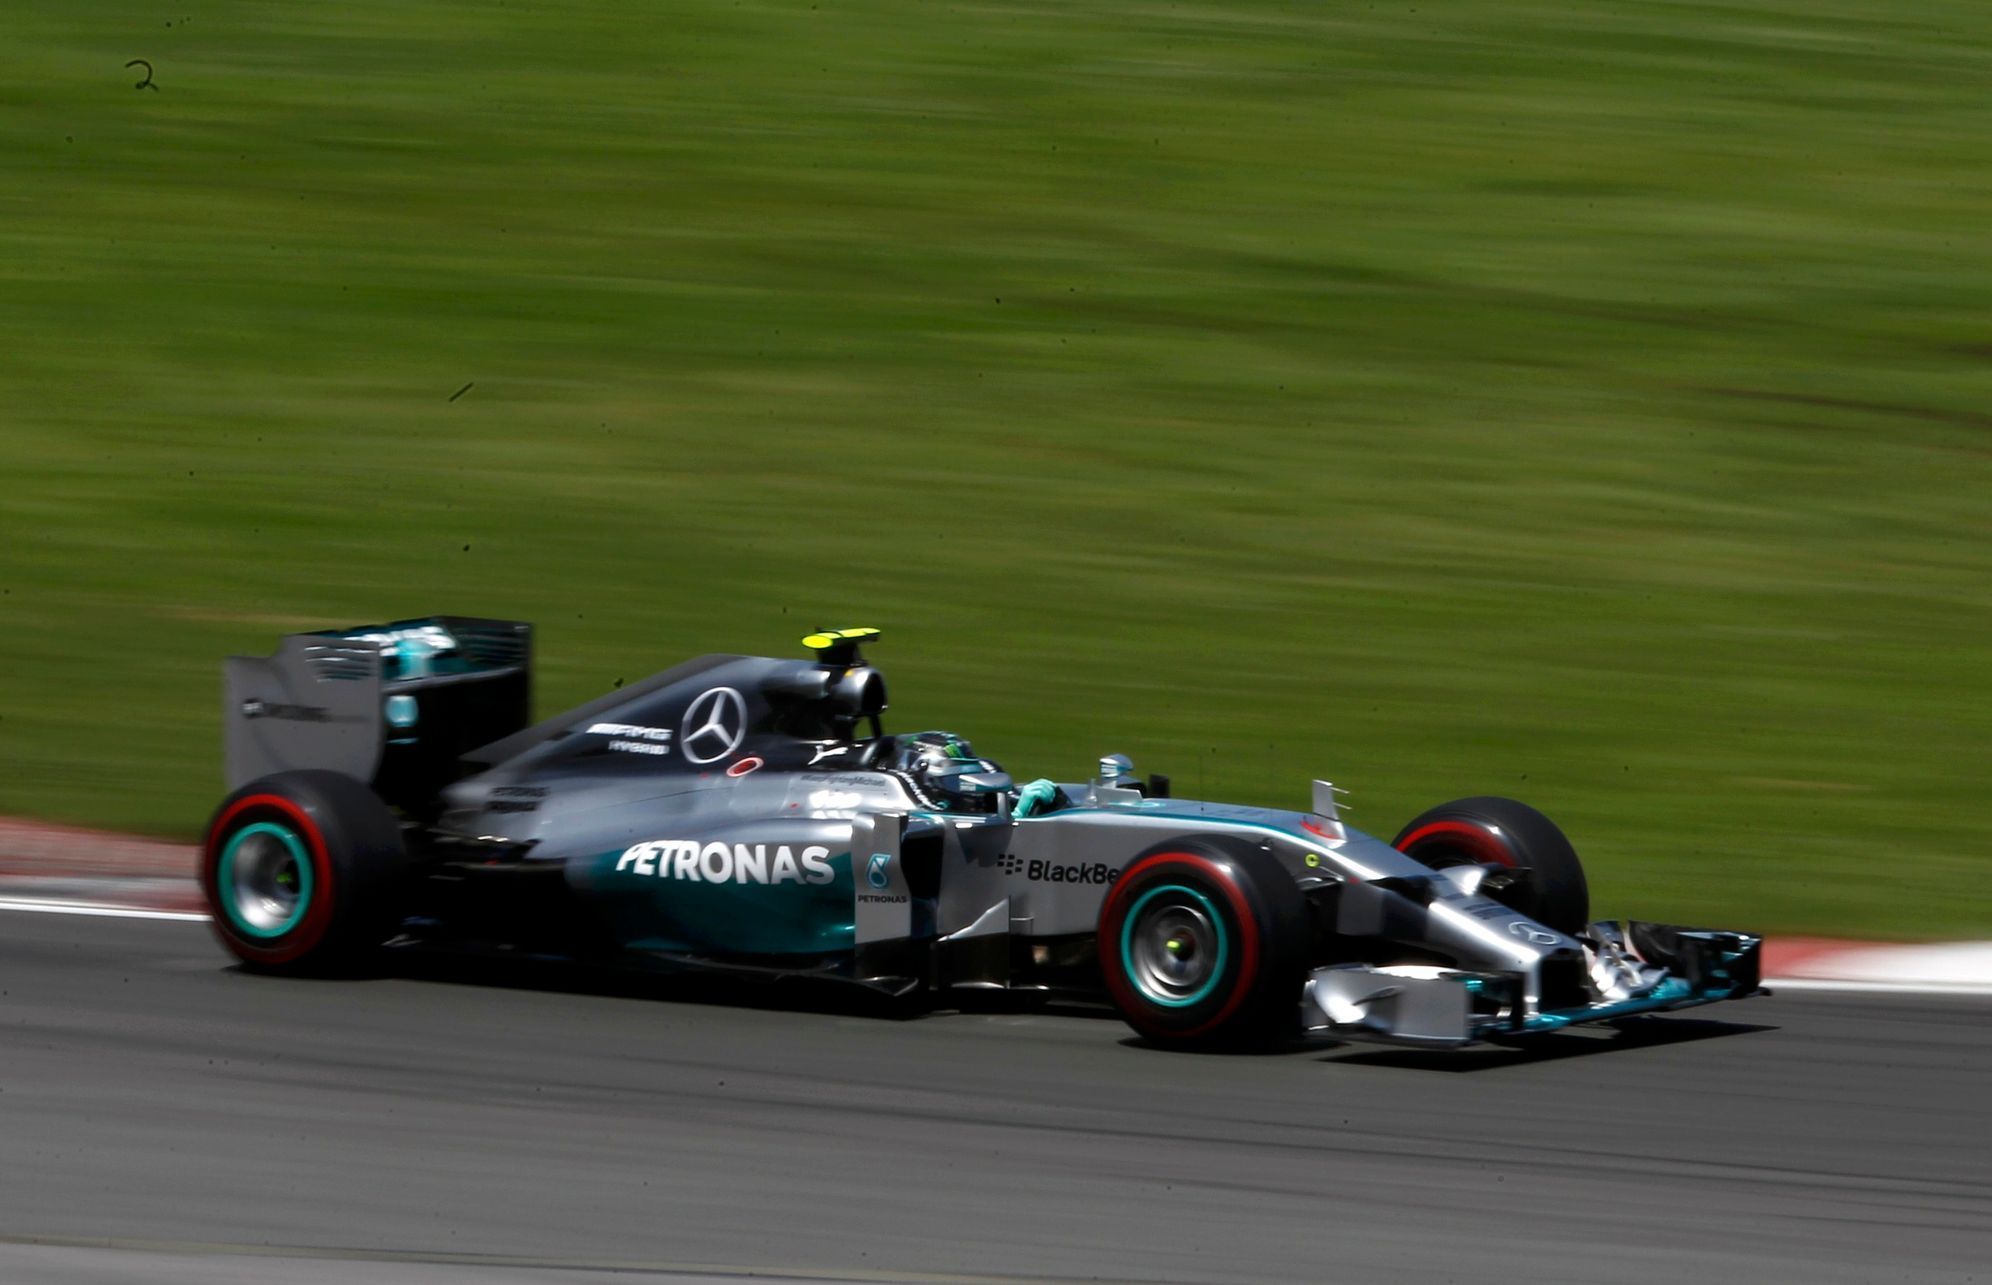 Mercedes Formula One driver Rosberg of Germany drives during the Canadian F1 Grand Prix at the Circuit Gilles Villeneuve in Montreal